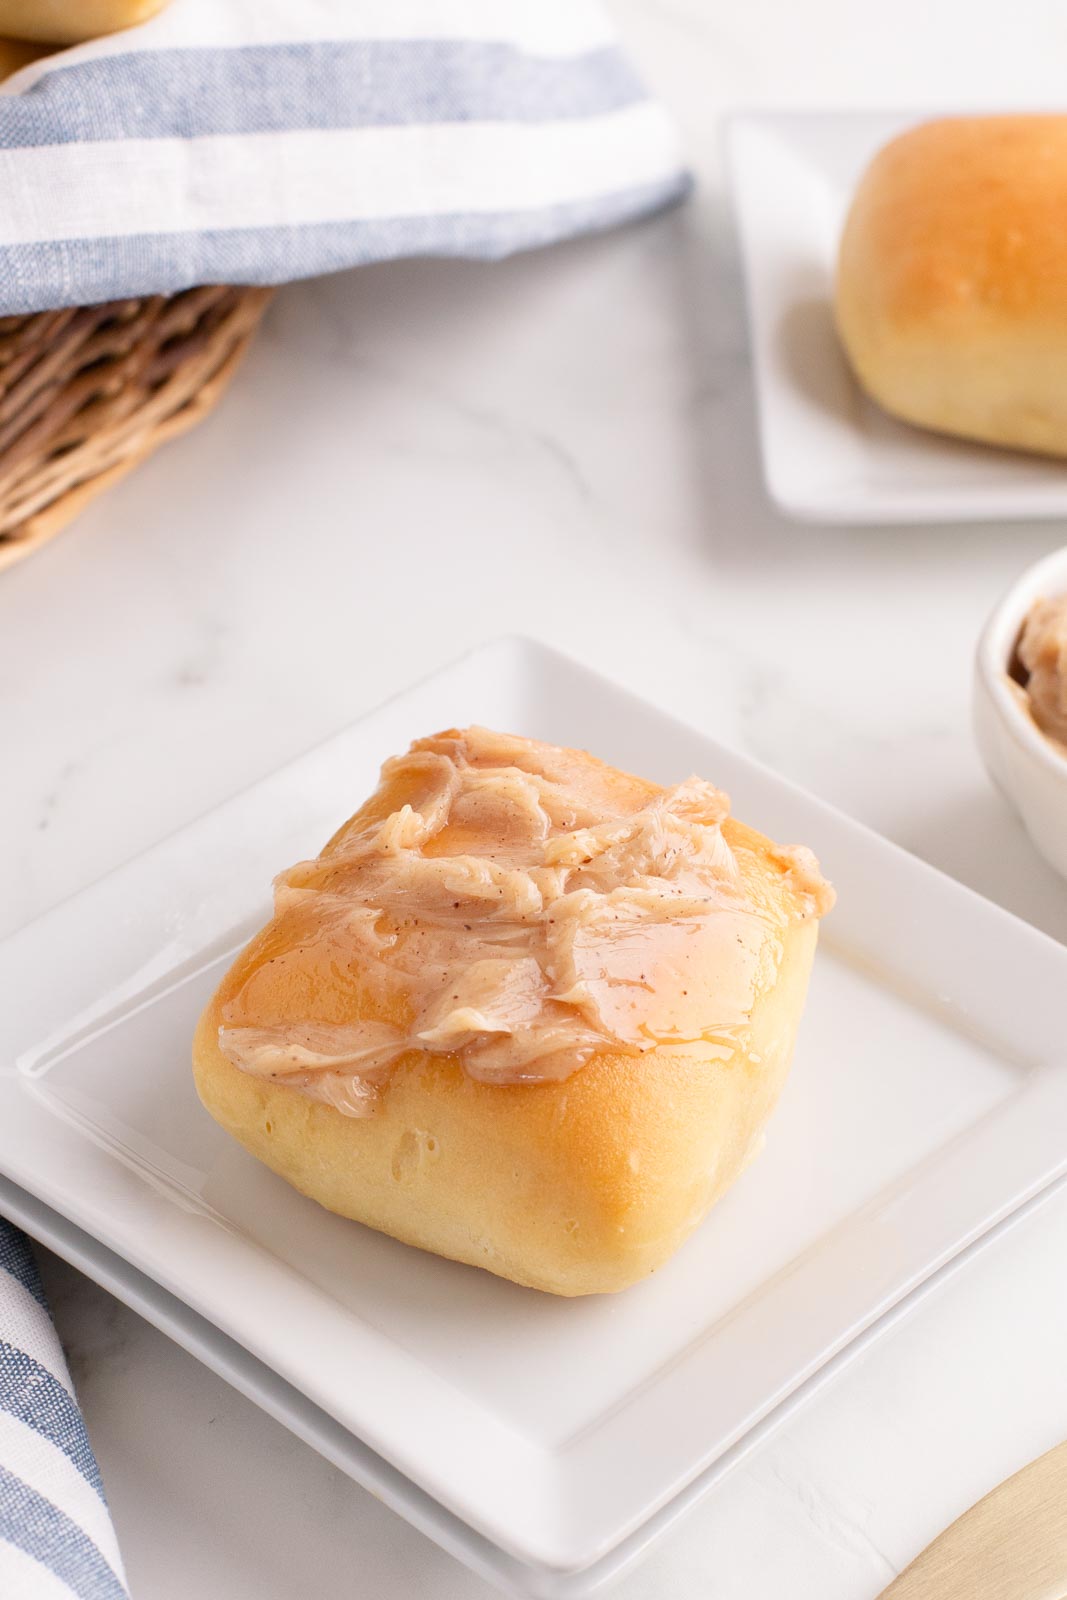 A Texas roadhouse roll smothered in honey cinnamon butter.